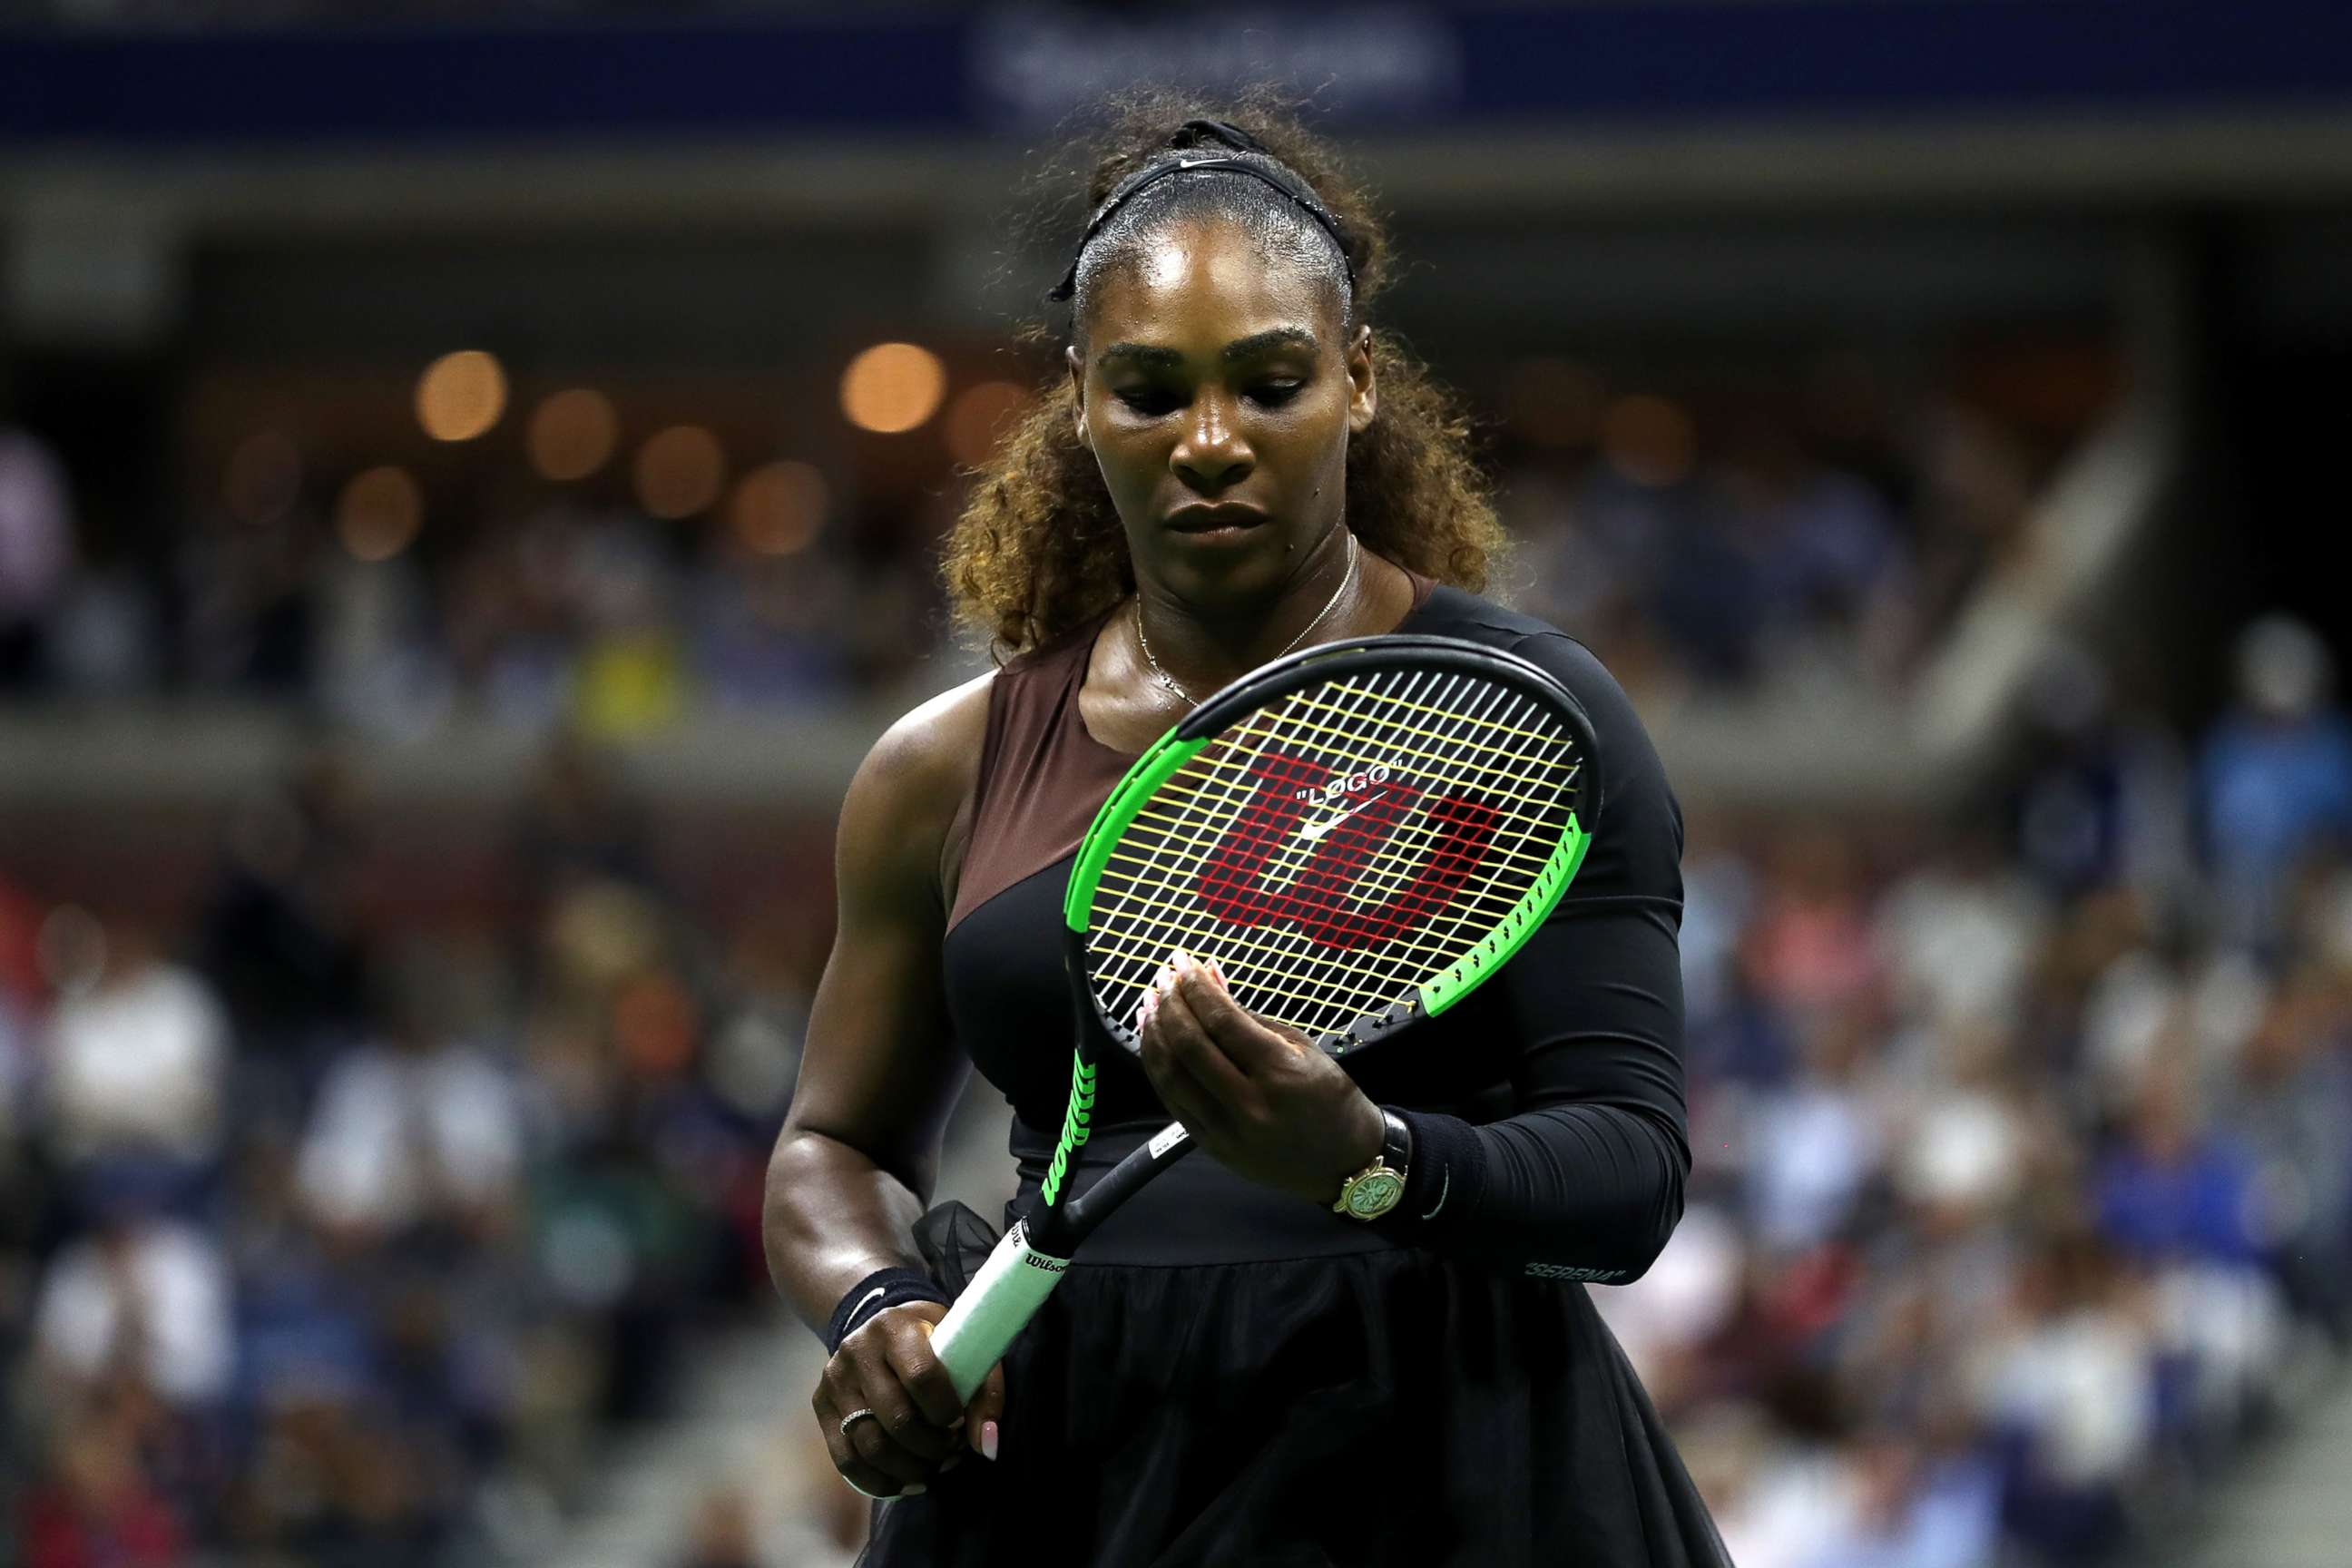 PHOTO: Serena Williams reacts during her Women's Singles finals match against Naomi Osaka at the 2018 U.S. Open in New York, Sept. 8, 2018.